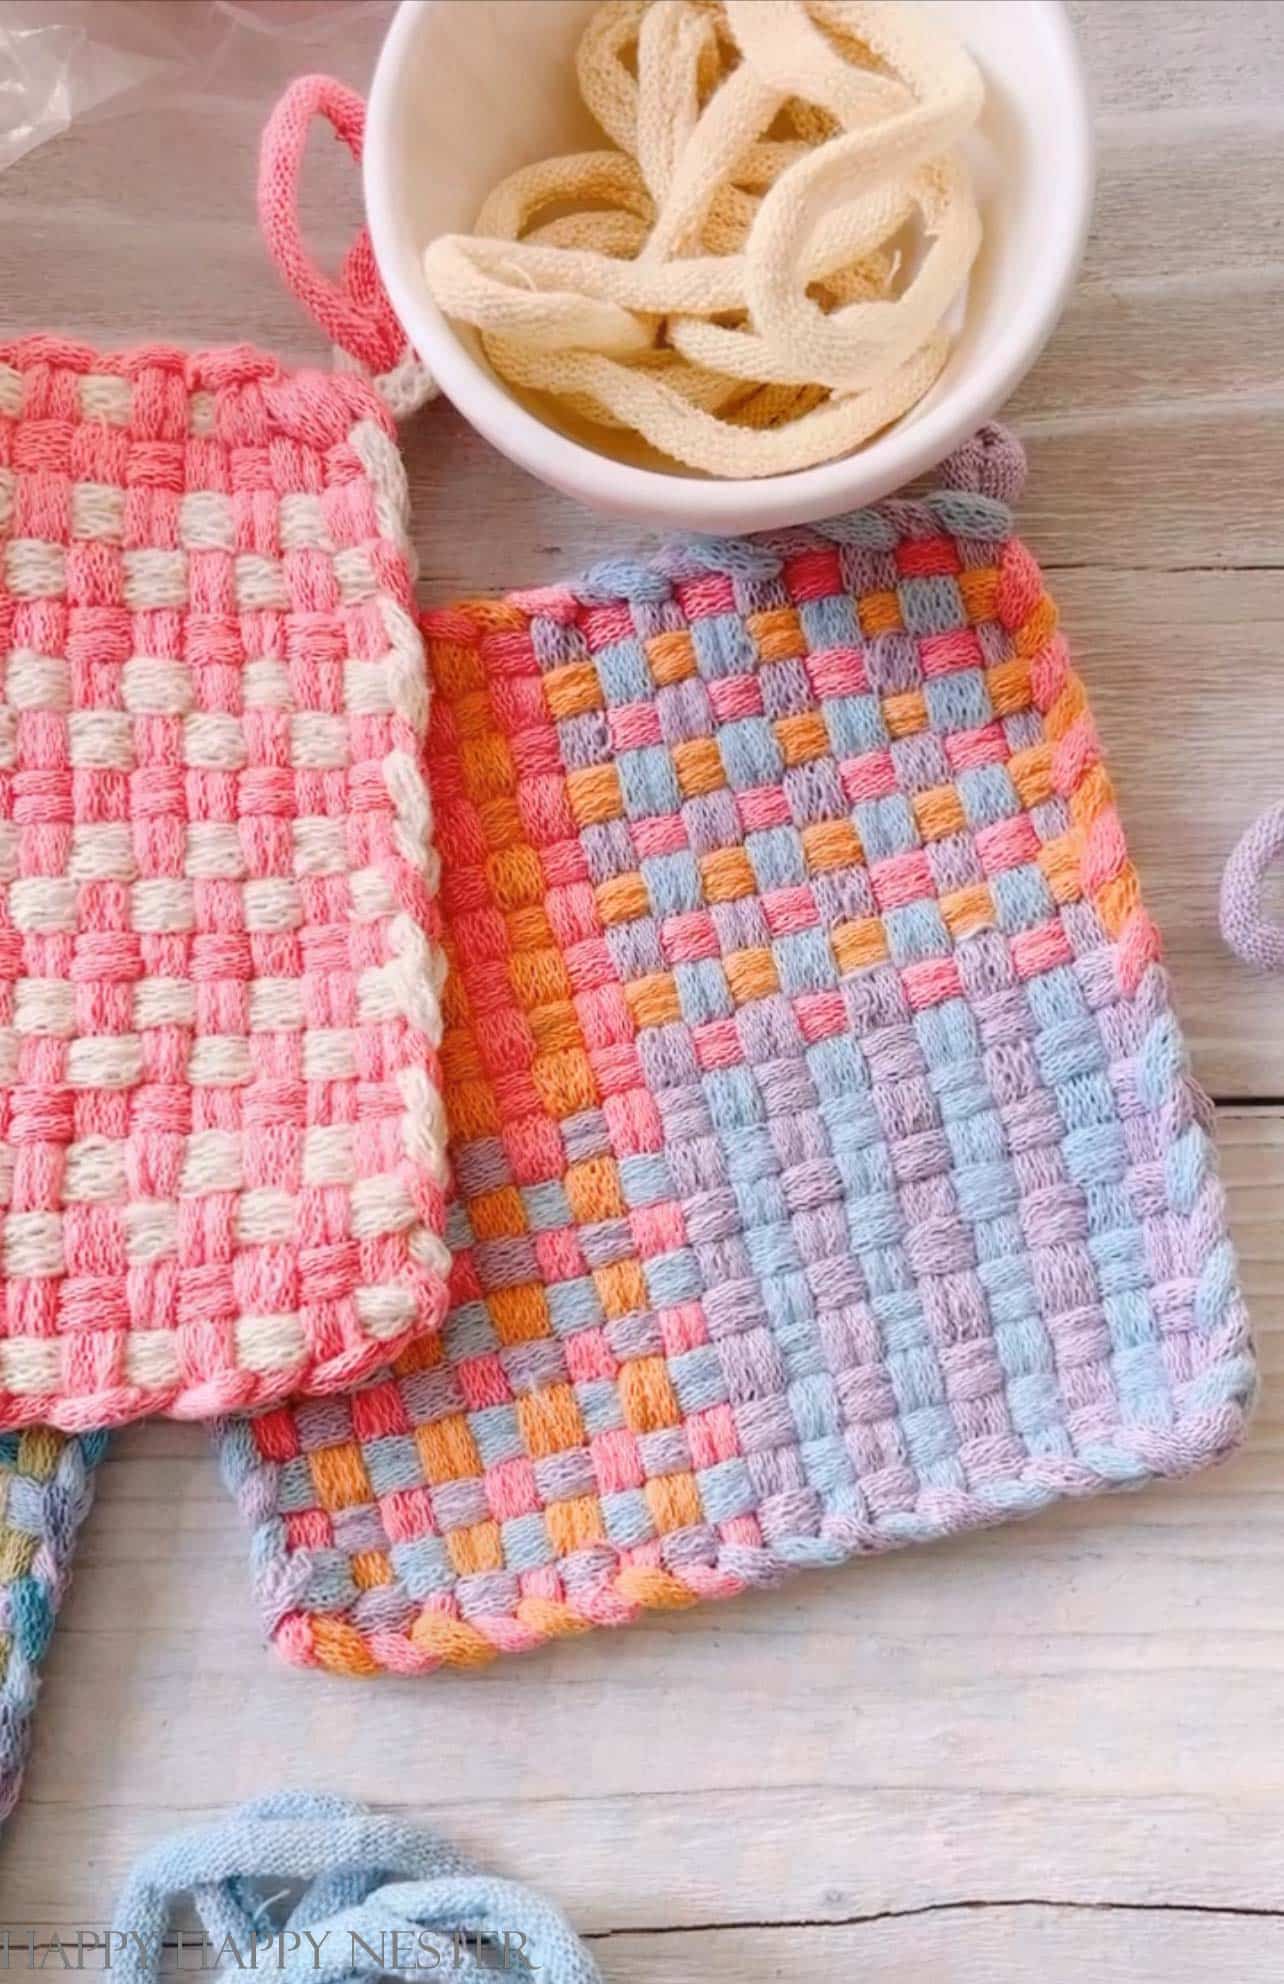 Potholder Loops - For Small Hands